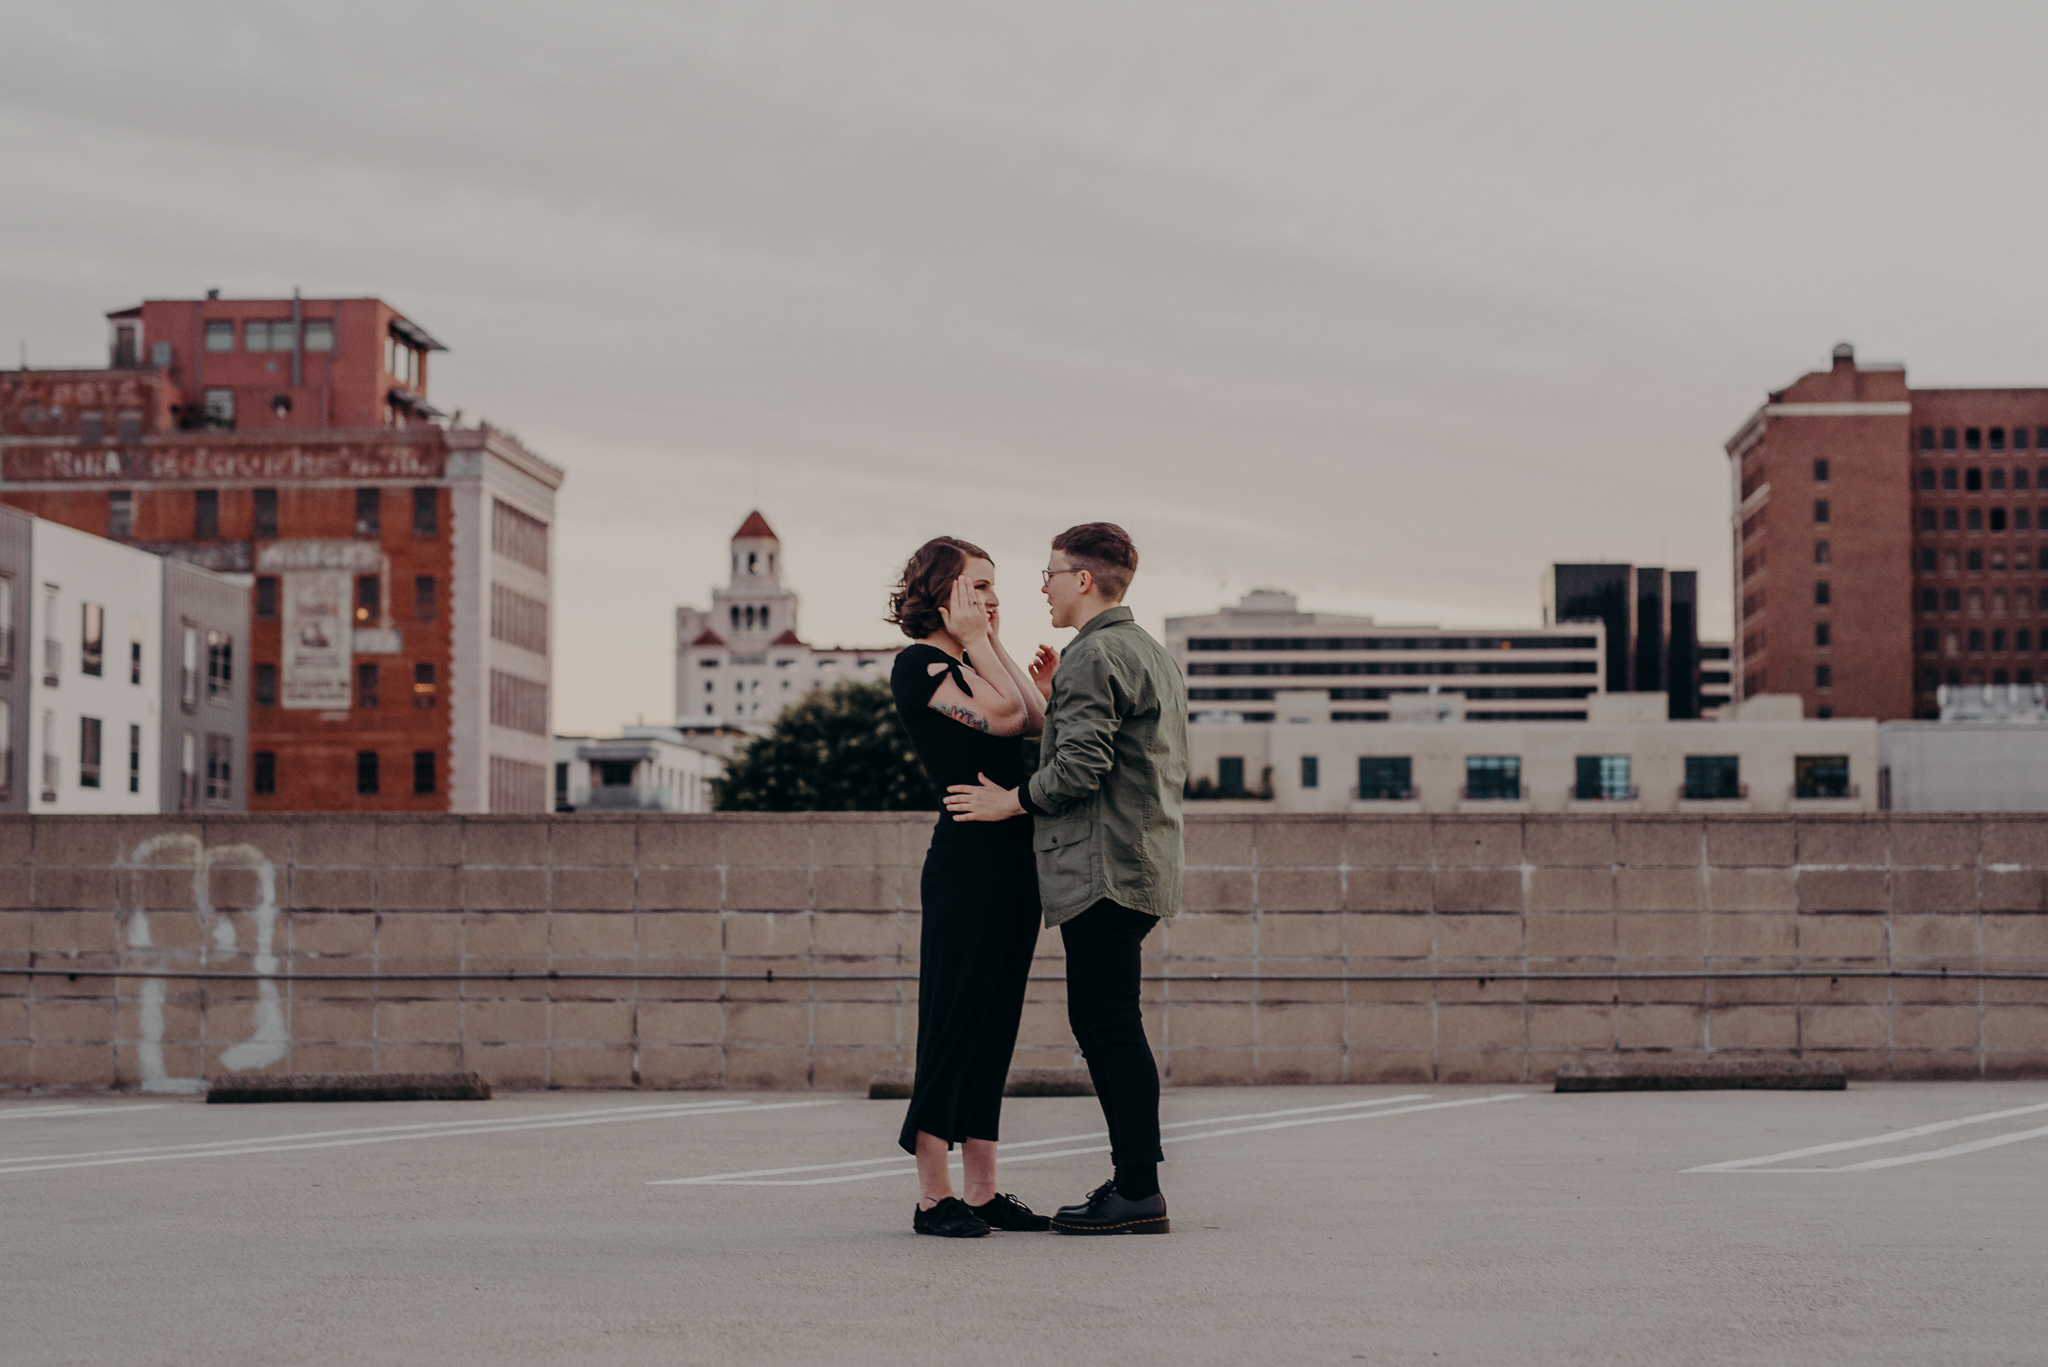 LGBTQ wedding photographer in los angeles - long beach engagement session - isaiahandtaylor.com-55.jpg